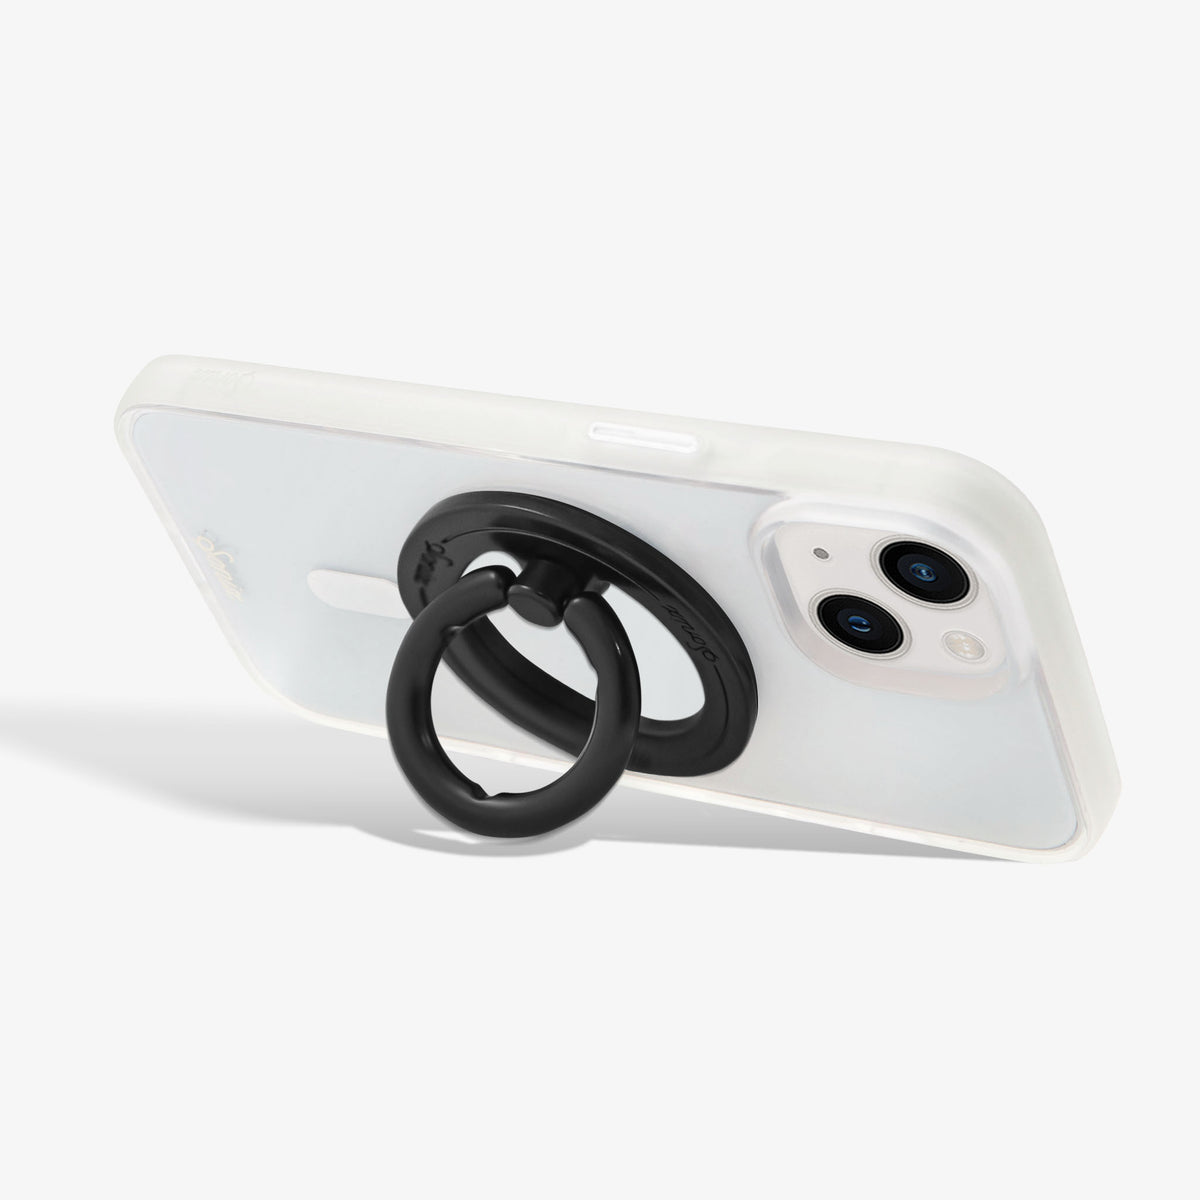 Review: Sonix's MagSafe-compatible phone ring adds stylish functionality -  Dans Tutorials